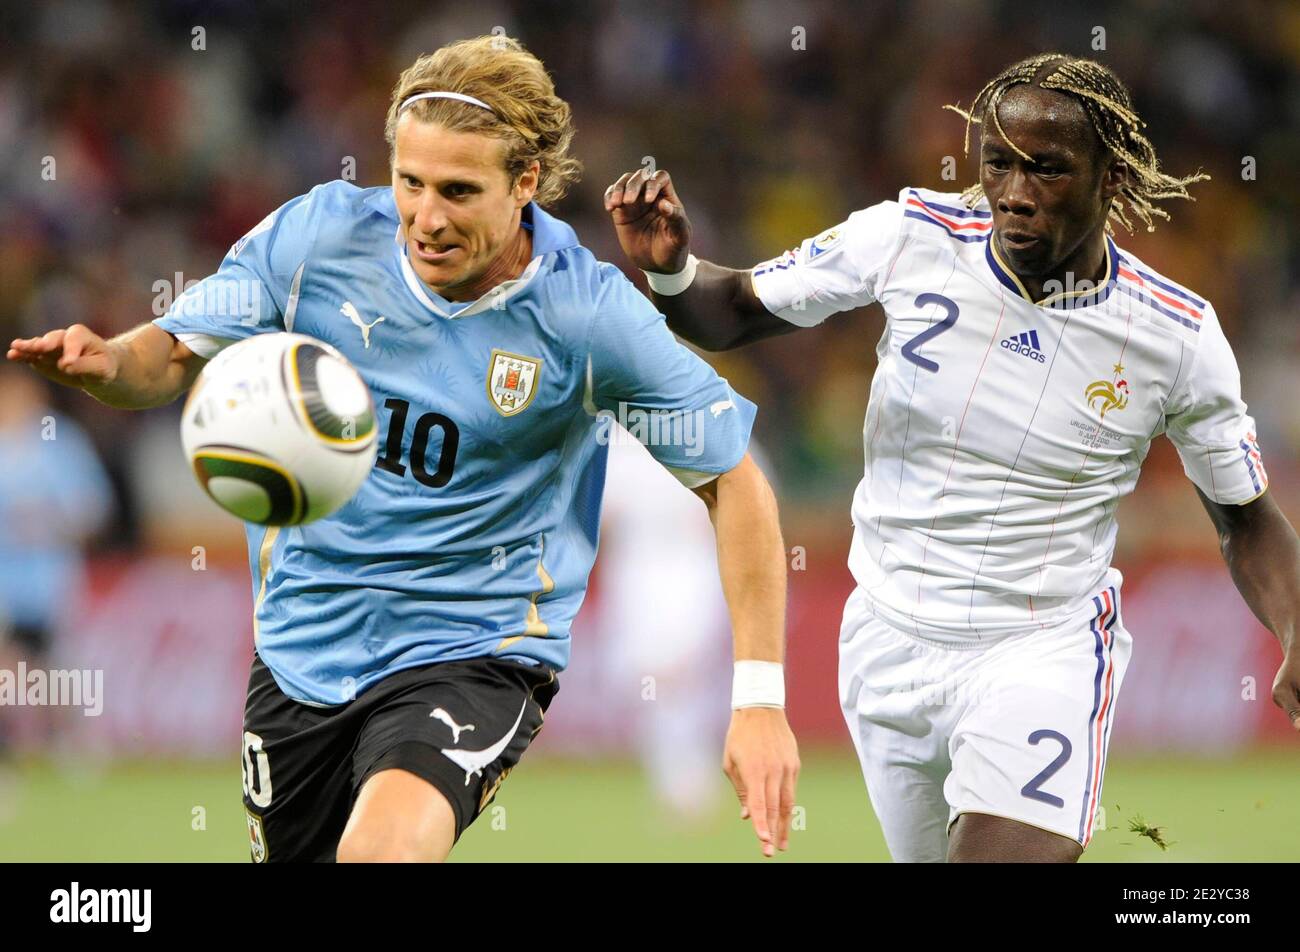 France's Bakari Sagna battles for the ball with Uruguay's Diego Forlan during the World Cup 2010 soccer match, Group A, France (France national football team) vs Uruguay of the Soccer World Cup 2010 in Capetown, South Africa on June 11, 2010. The match ended in a 0-0 draw. Photo by Henri Szwarc/ABACAPRESS.COM Stock Photo